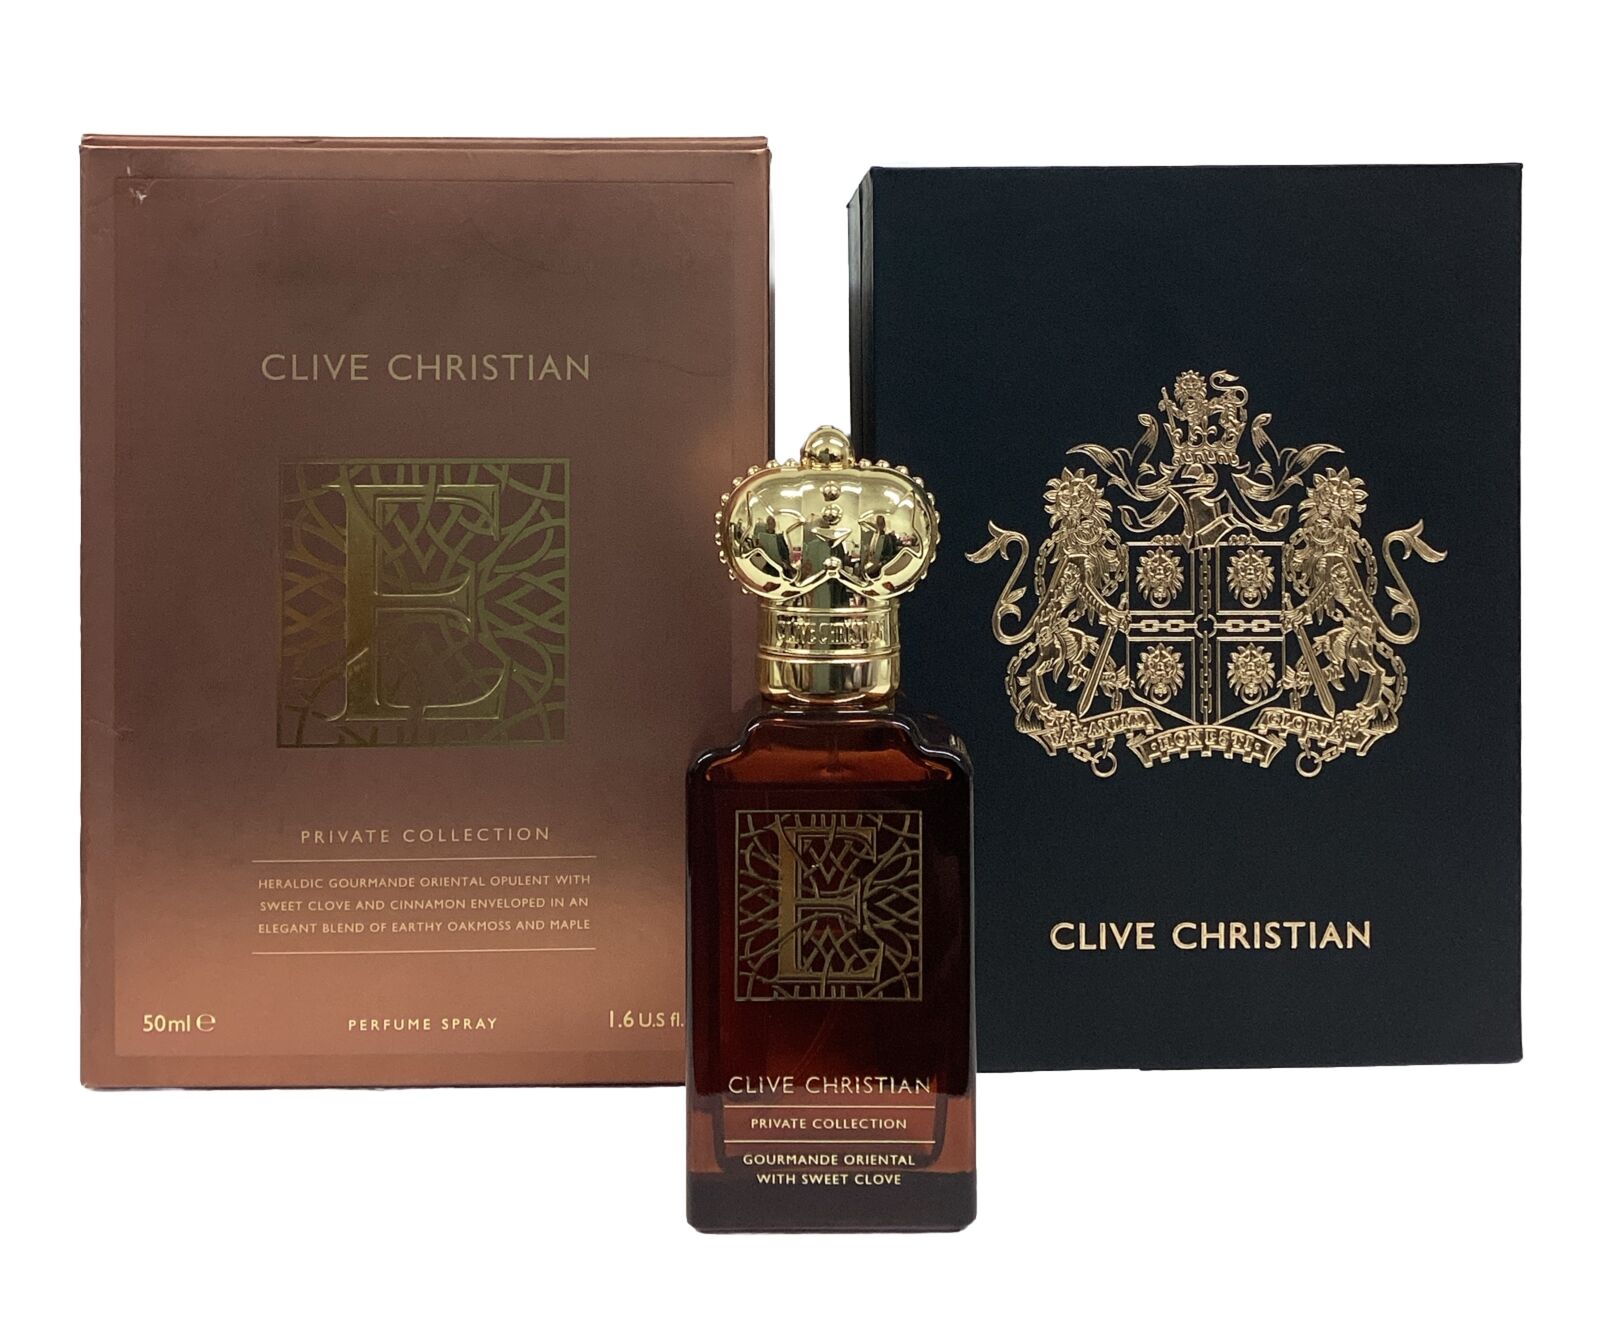 Clive Christian E Private Collection Perfume 1.6oz 90%Full As Pictured